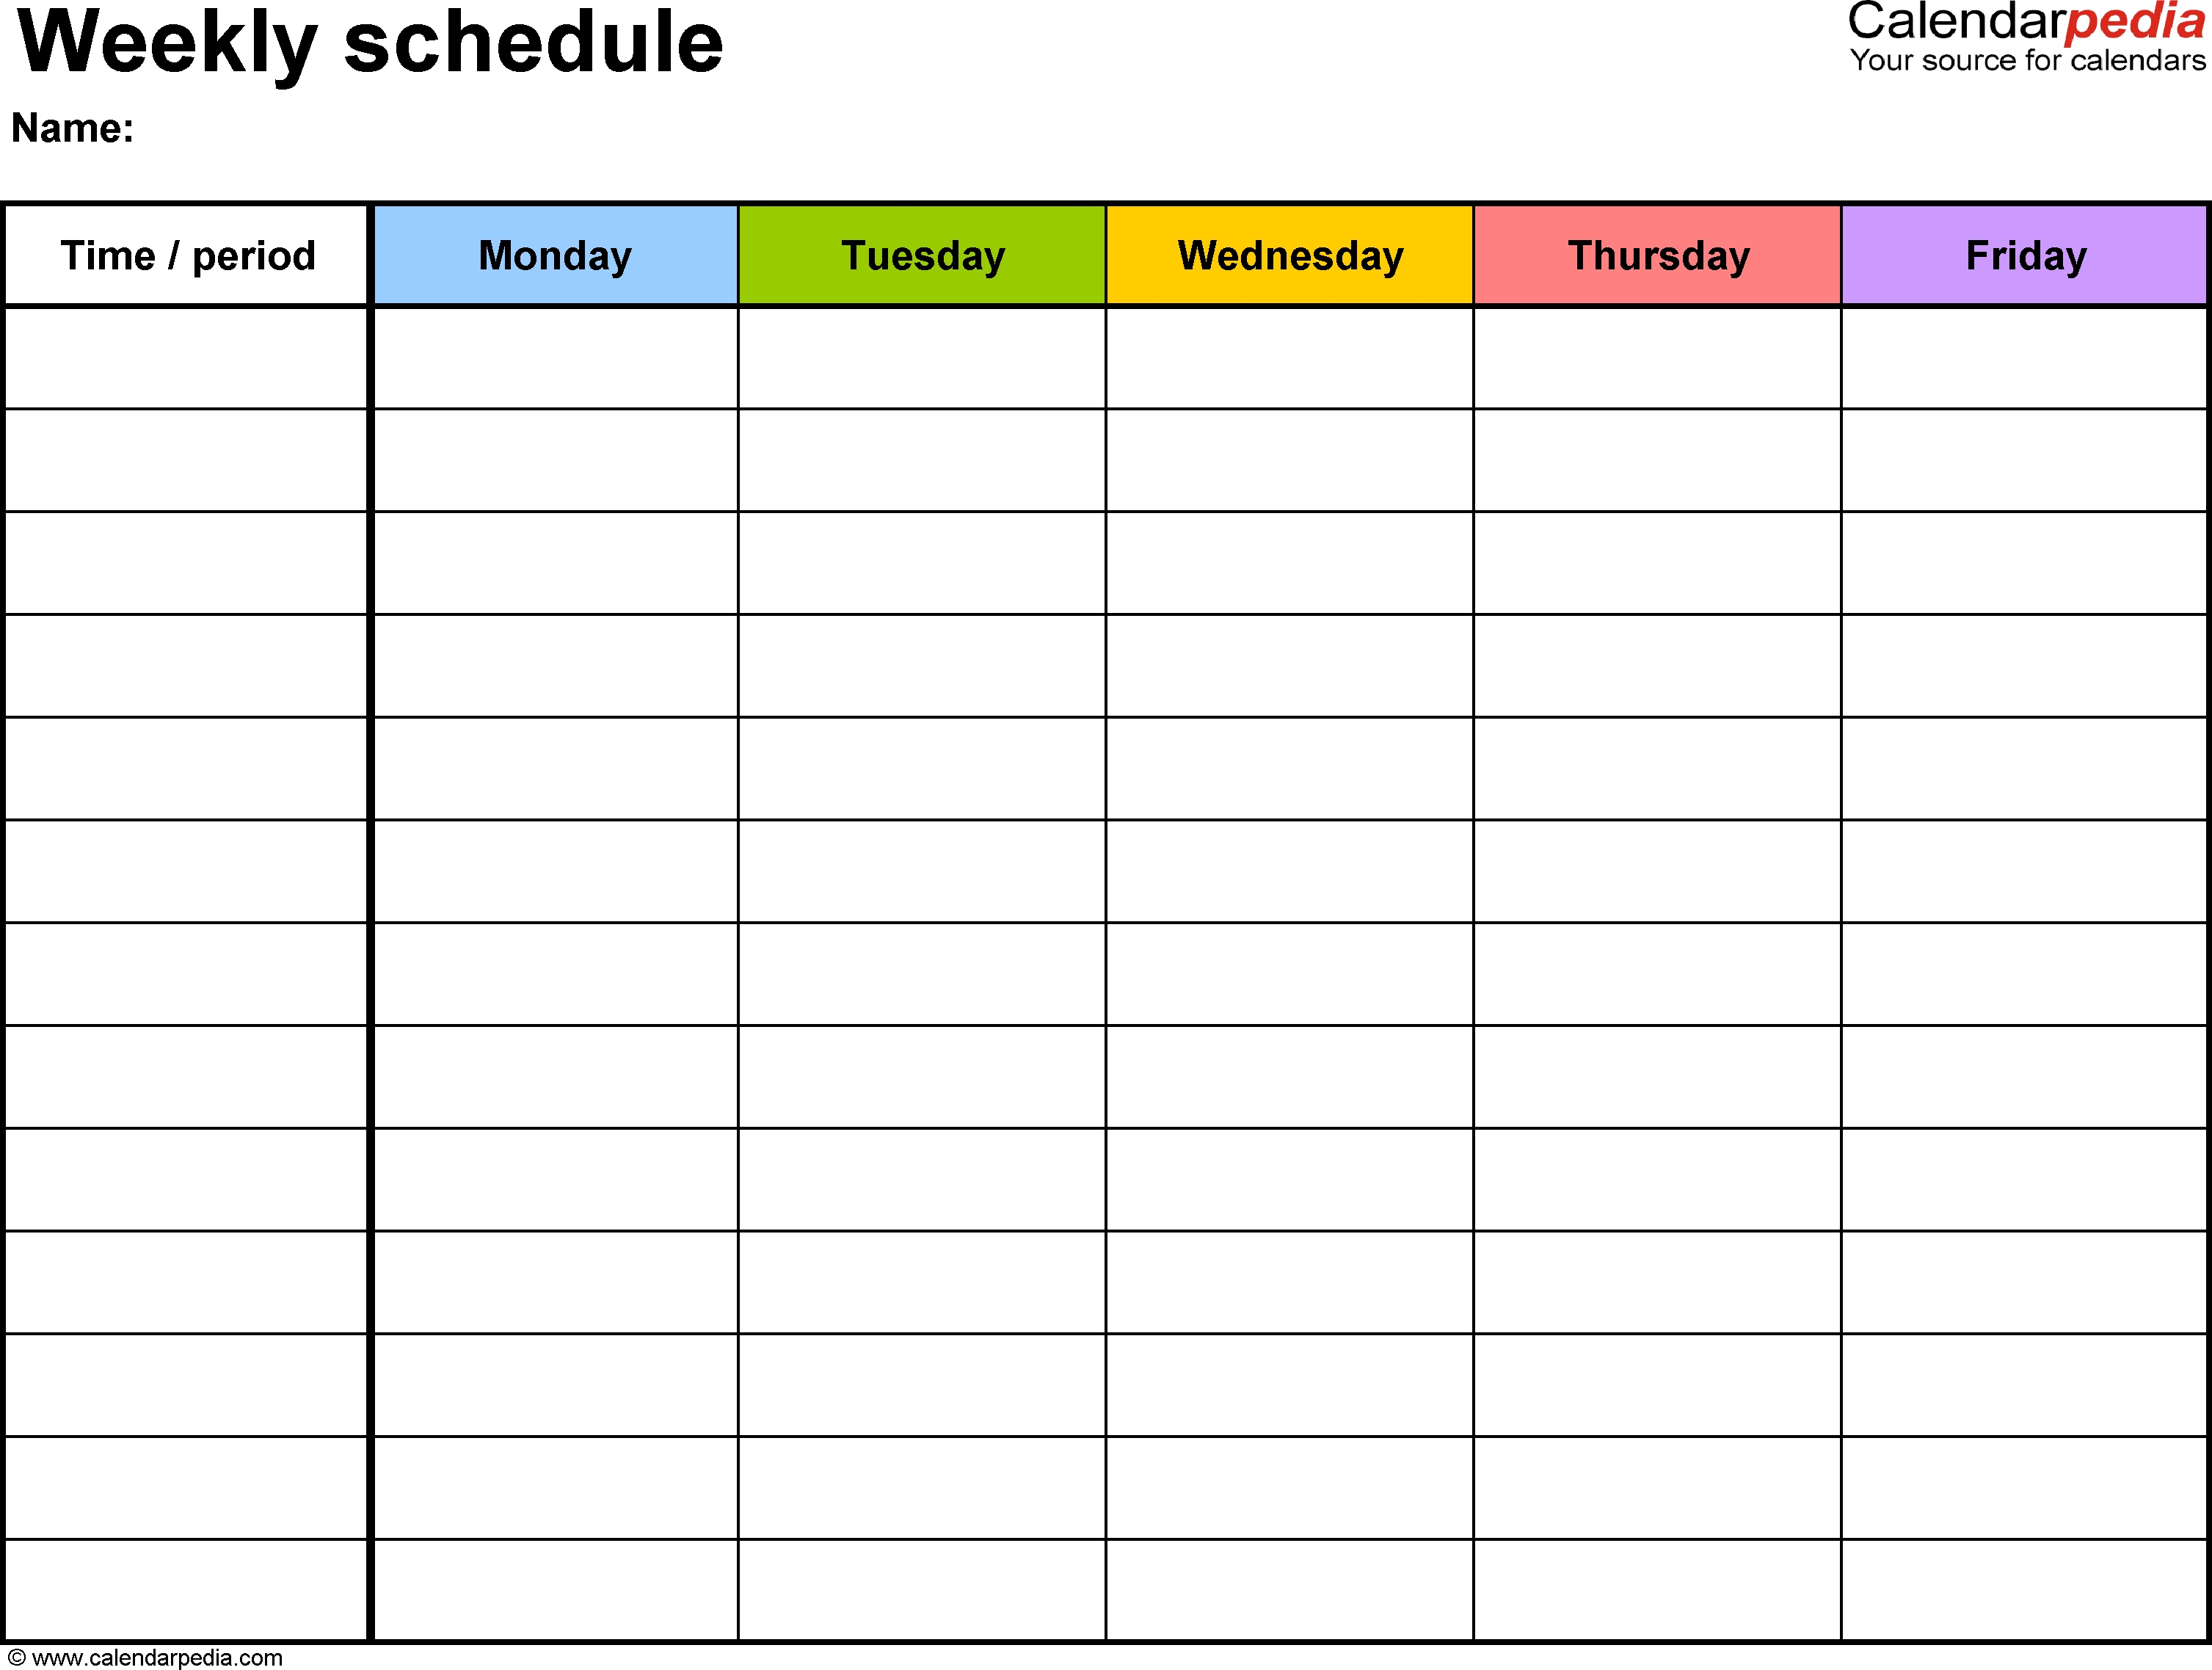 Free Weekly Schedule Templates For Word - 18 Templates within Printable 7-Day Calendar Template Monday Starts With That